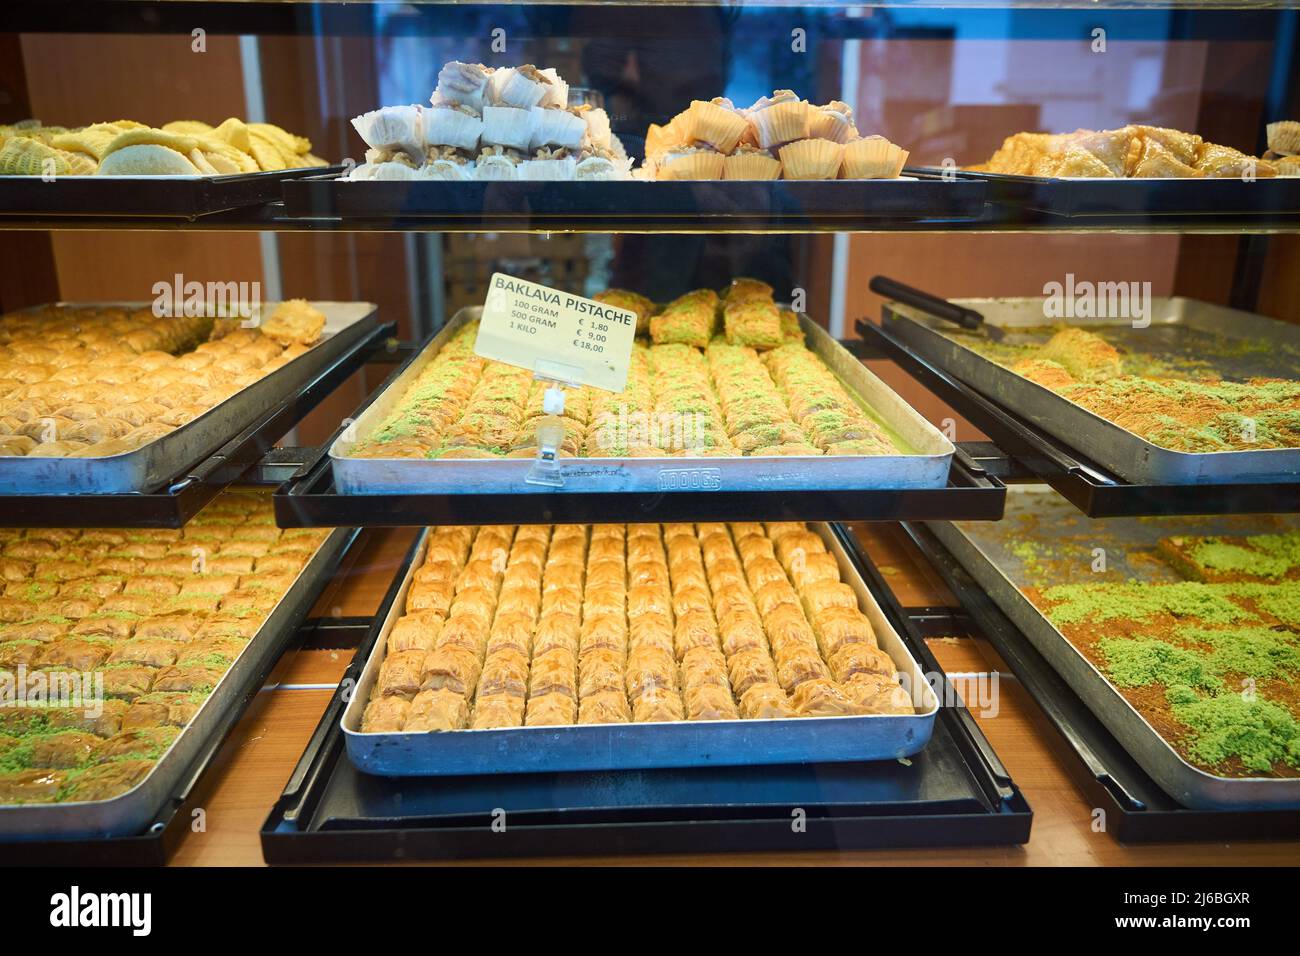 2022-04-30 11:19:39 THE HAGUE - In preparation for the sugar fest,  delicacies are prepared at the bakery at the end of Ramadan. The Islamic  fasting month is over. Muslims around the world